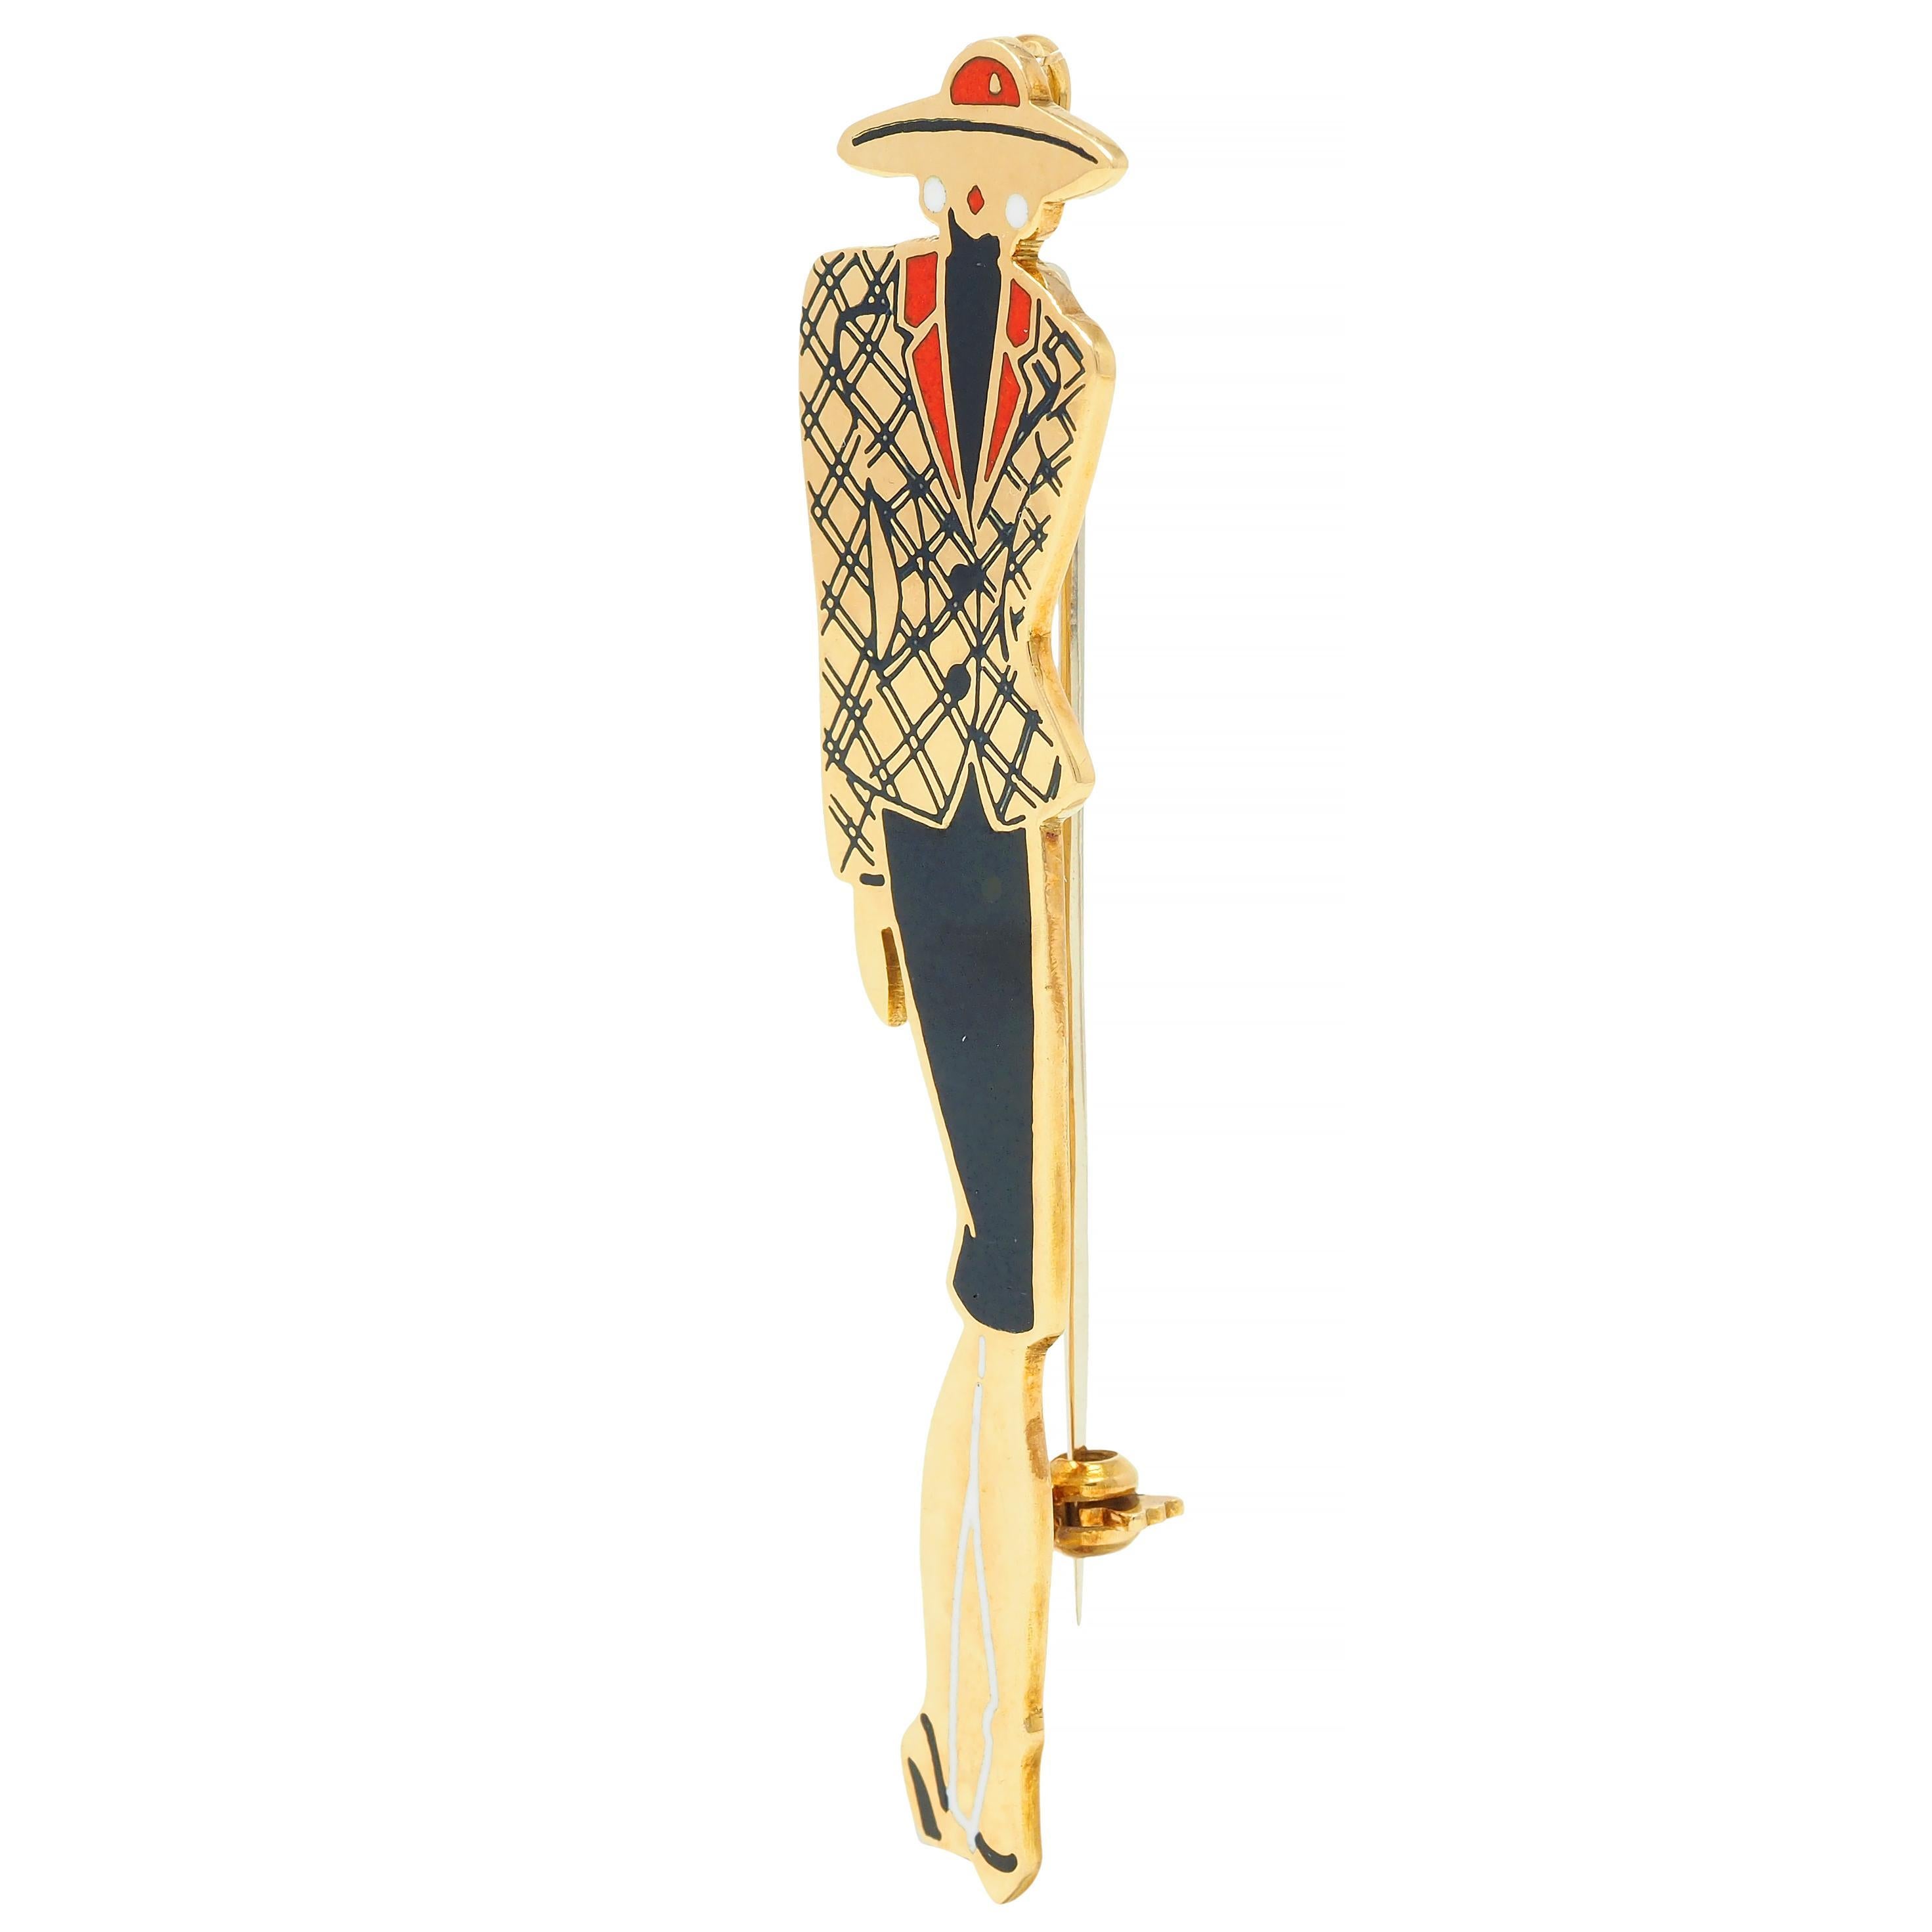 Designed as a gold brooch depicting a stylish woman with pencil skirt, plaid blazer, wide hat, and earrings 
Decorated with graphic enamel - opaque glossy white, red, and black 
Exhibiting minimal loss - with high polish finish
Completed by